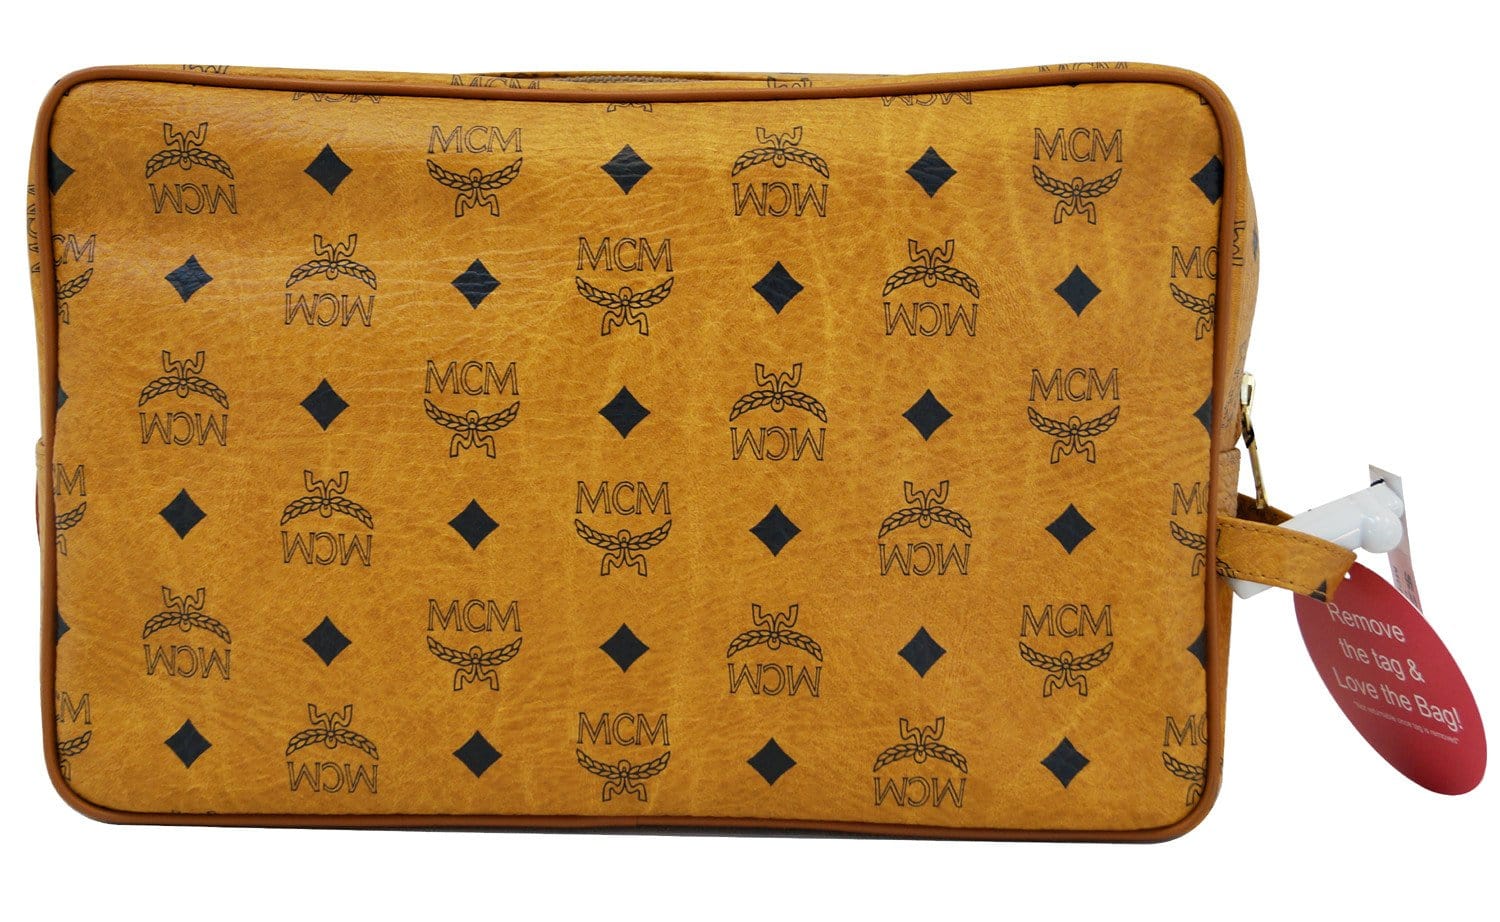 Mcm Authenticated Clutch Bag